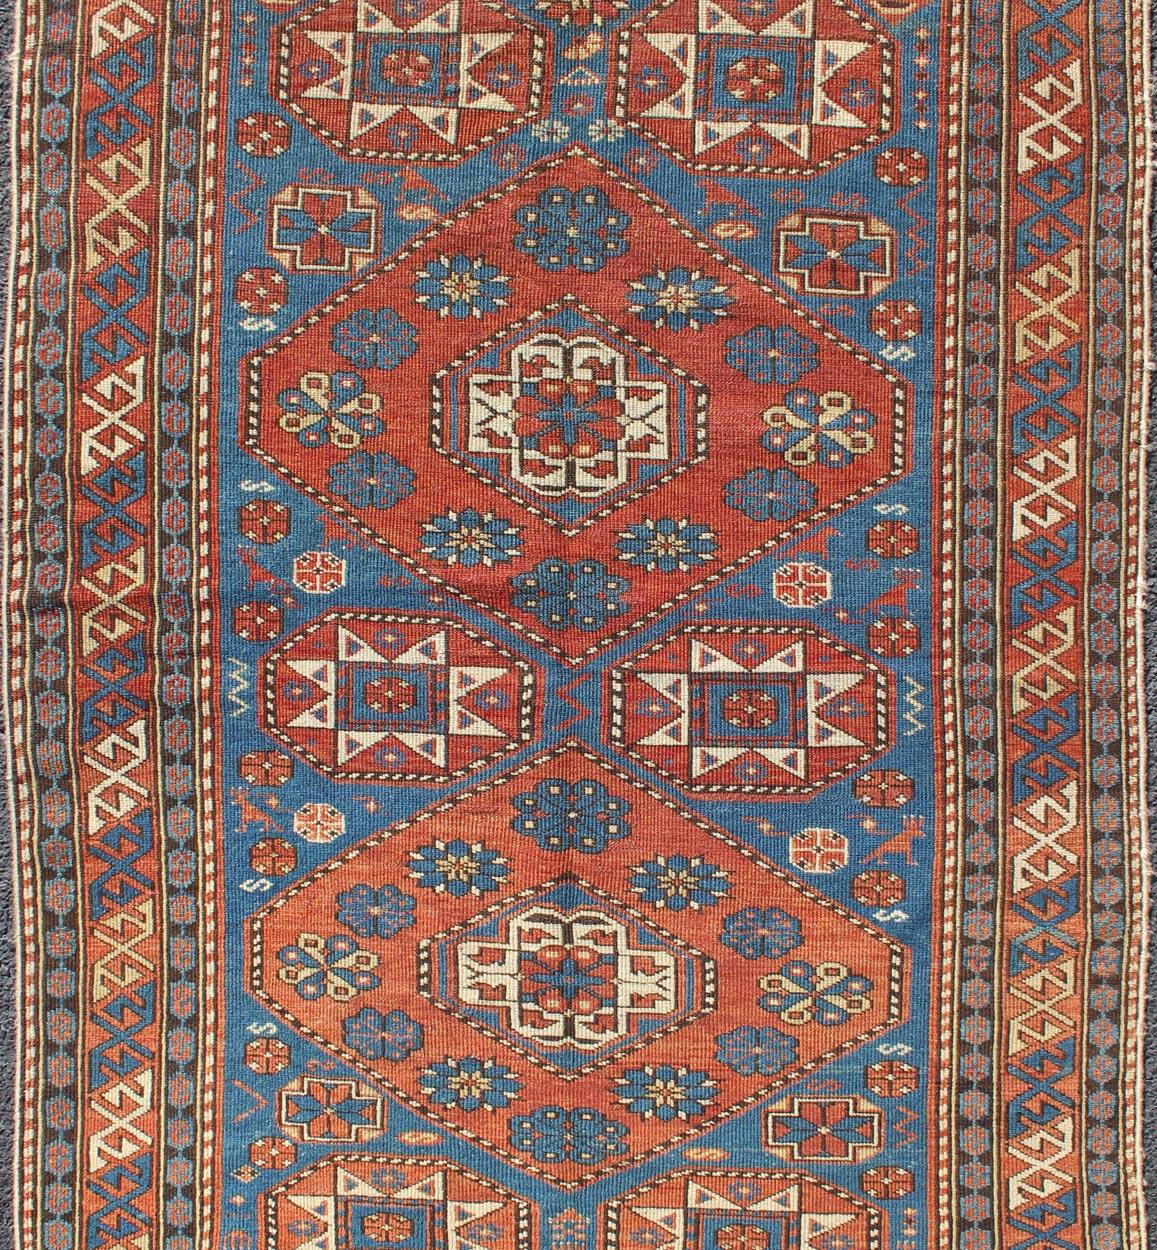  Antique Caucasian Shirvan Rug with Geometric Design in Brunt Orange and Blue. Keivan Woven Arts / rug M14-0905, country of origin / type: Caucus / Shirvan, circa 1890.
Measures: 3'6 x 5'1.
This stunning late 19th century antique Shirvan rug from